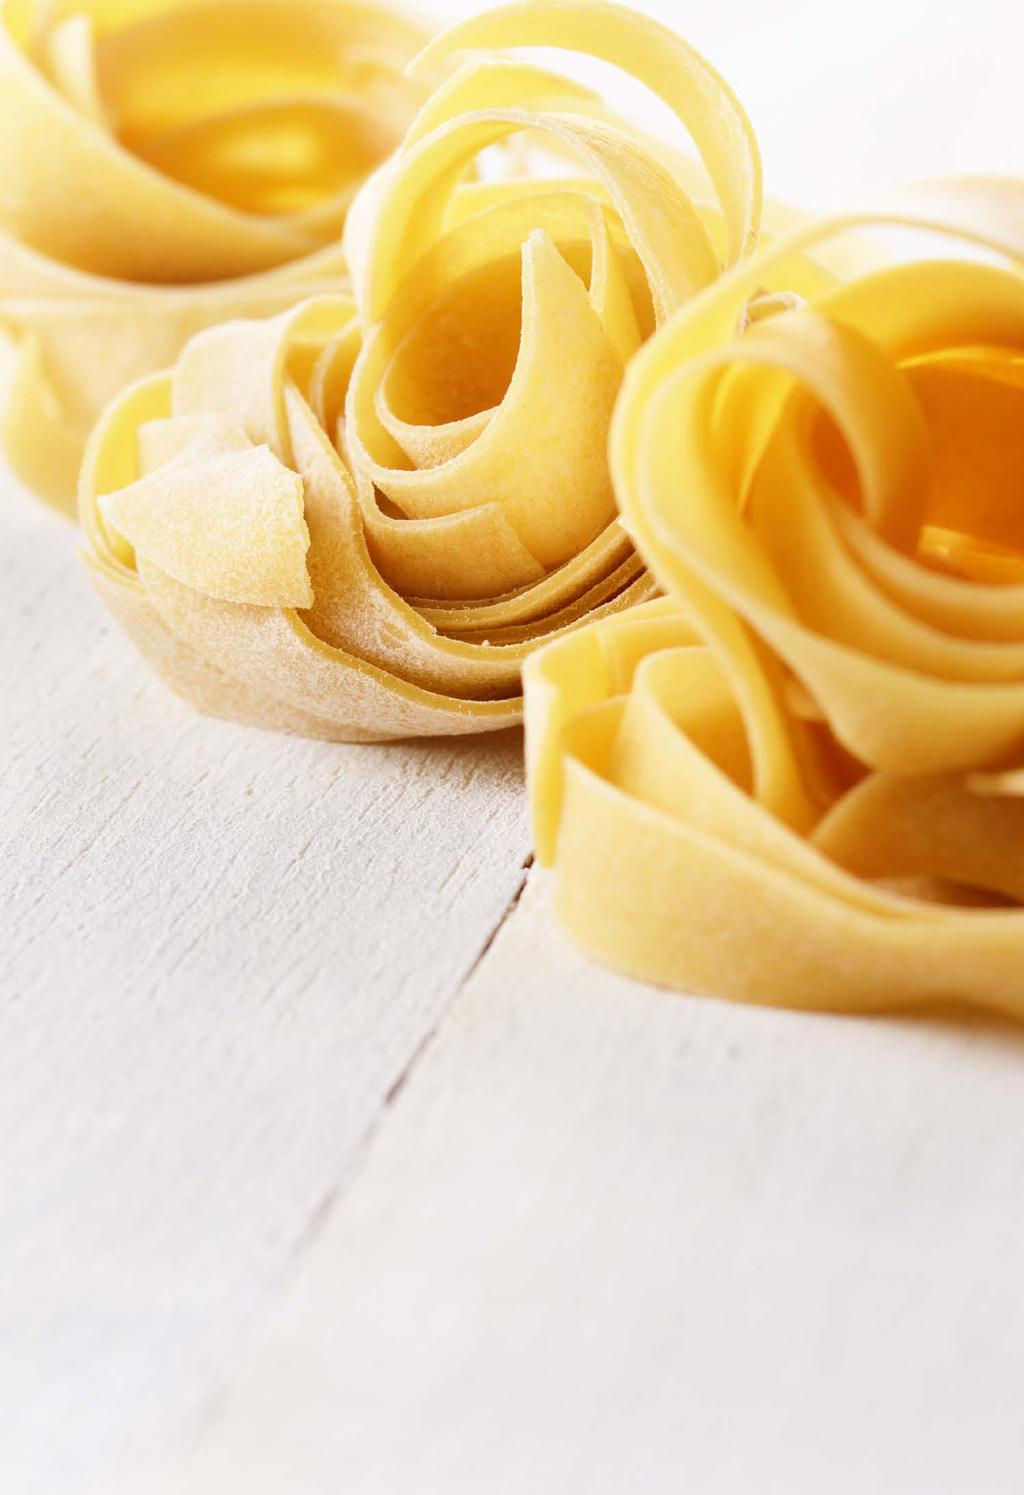 COOKING TIP As a general rule, you should cook 80g of pasta